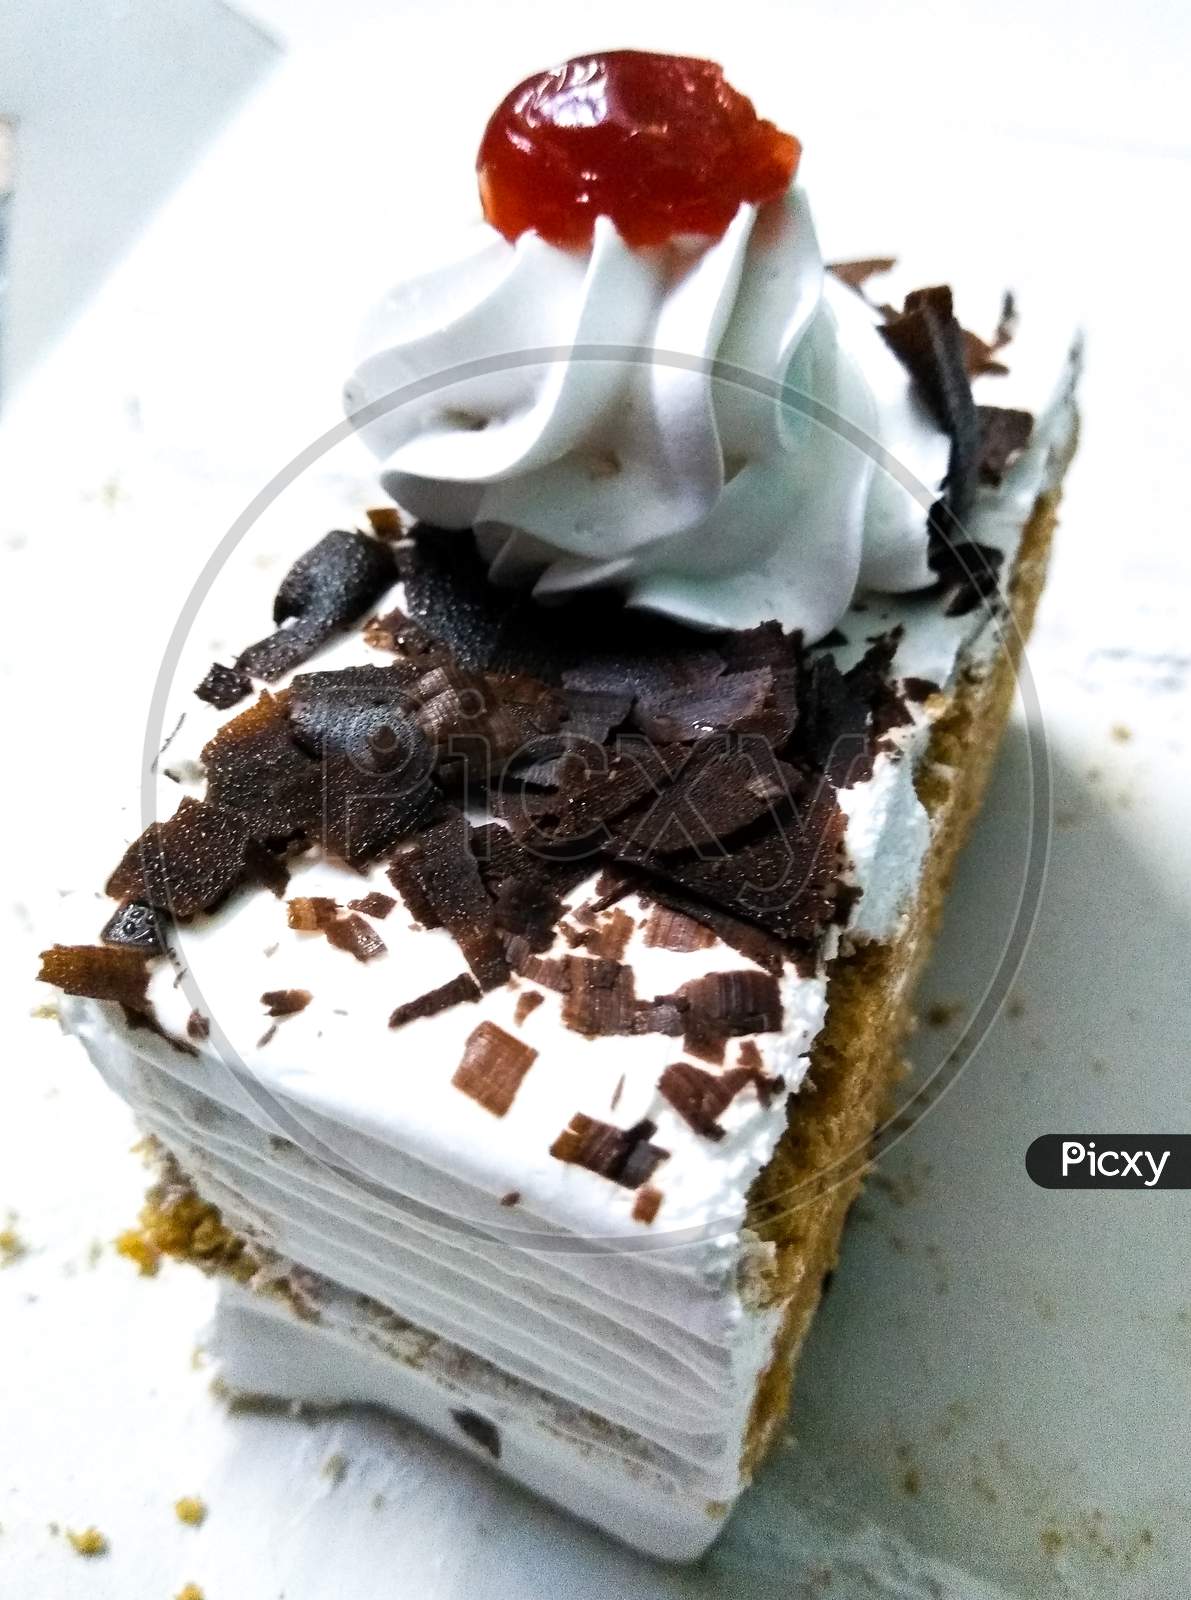 A picture of Cake with selected focus